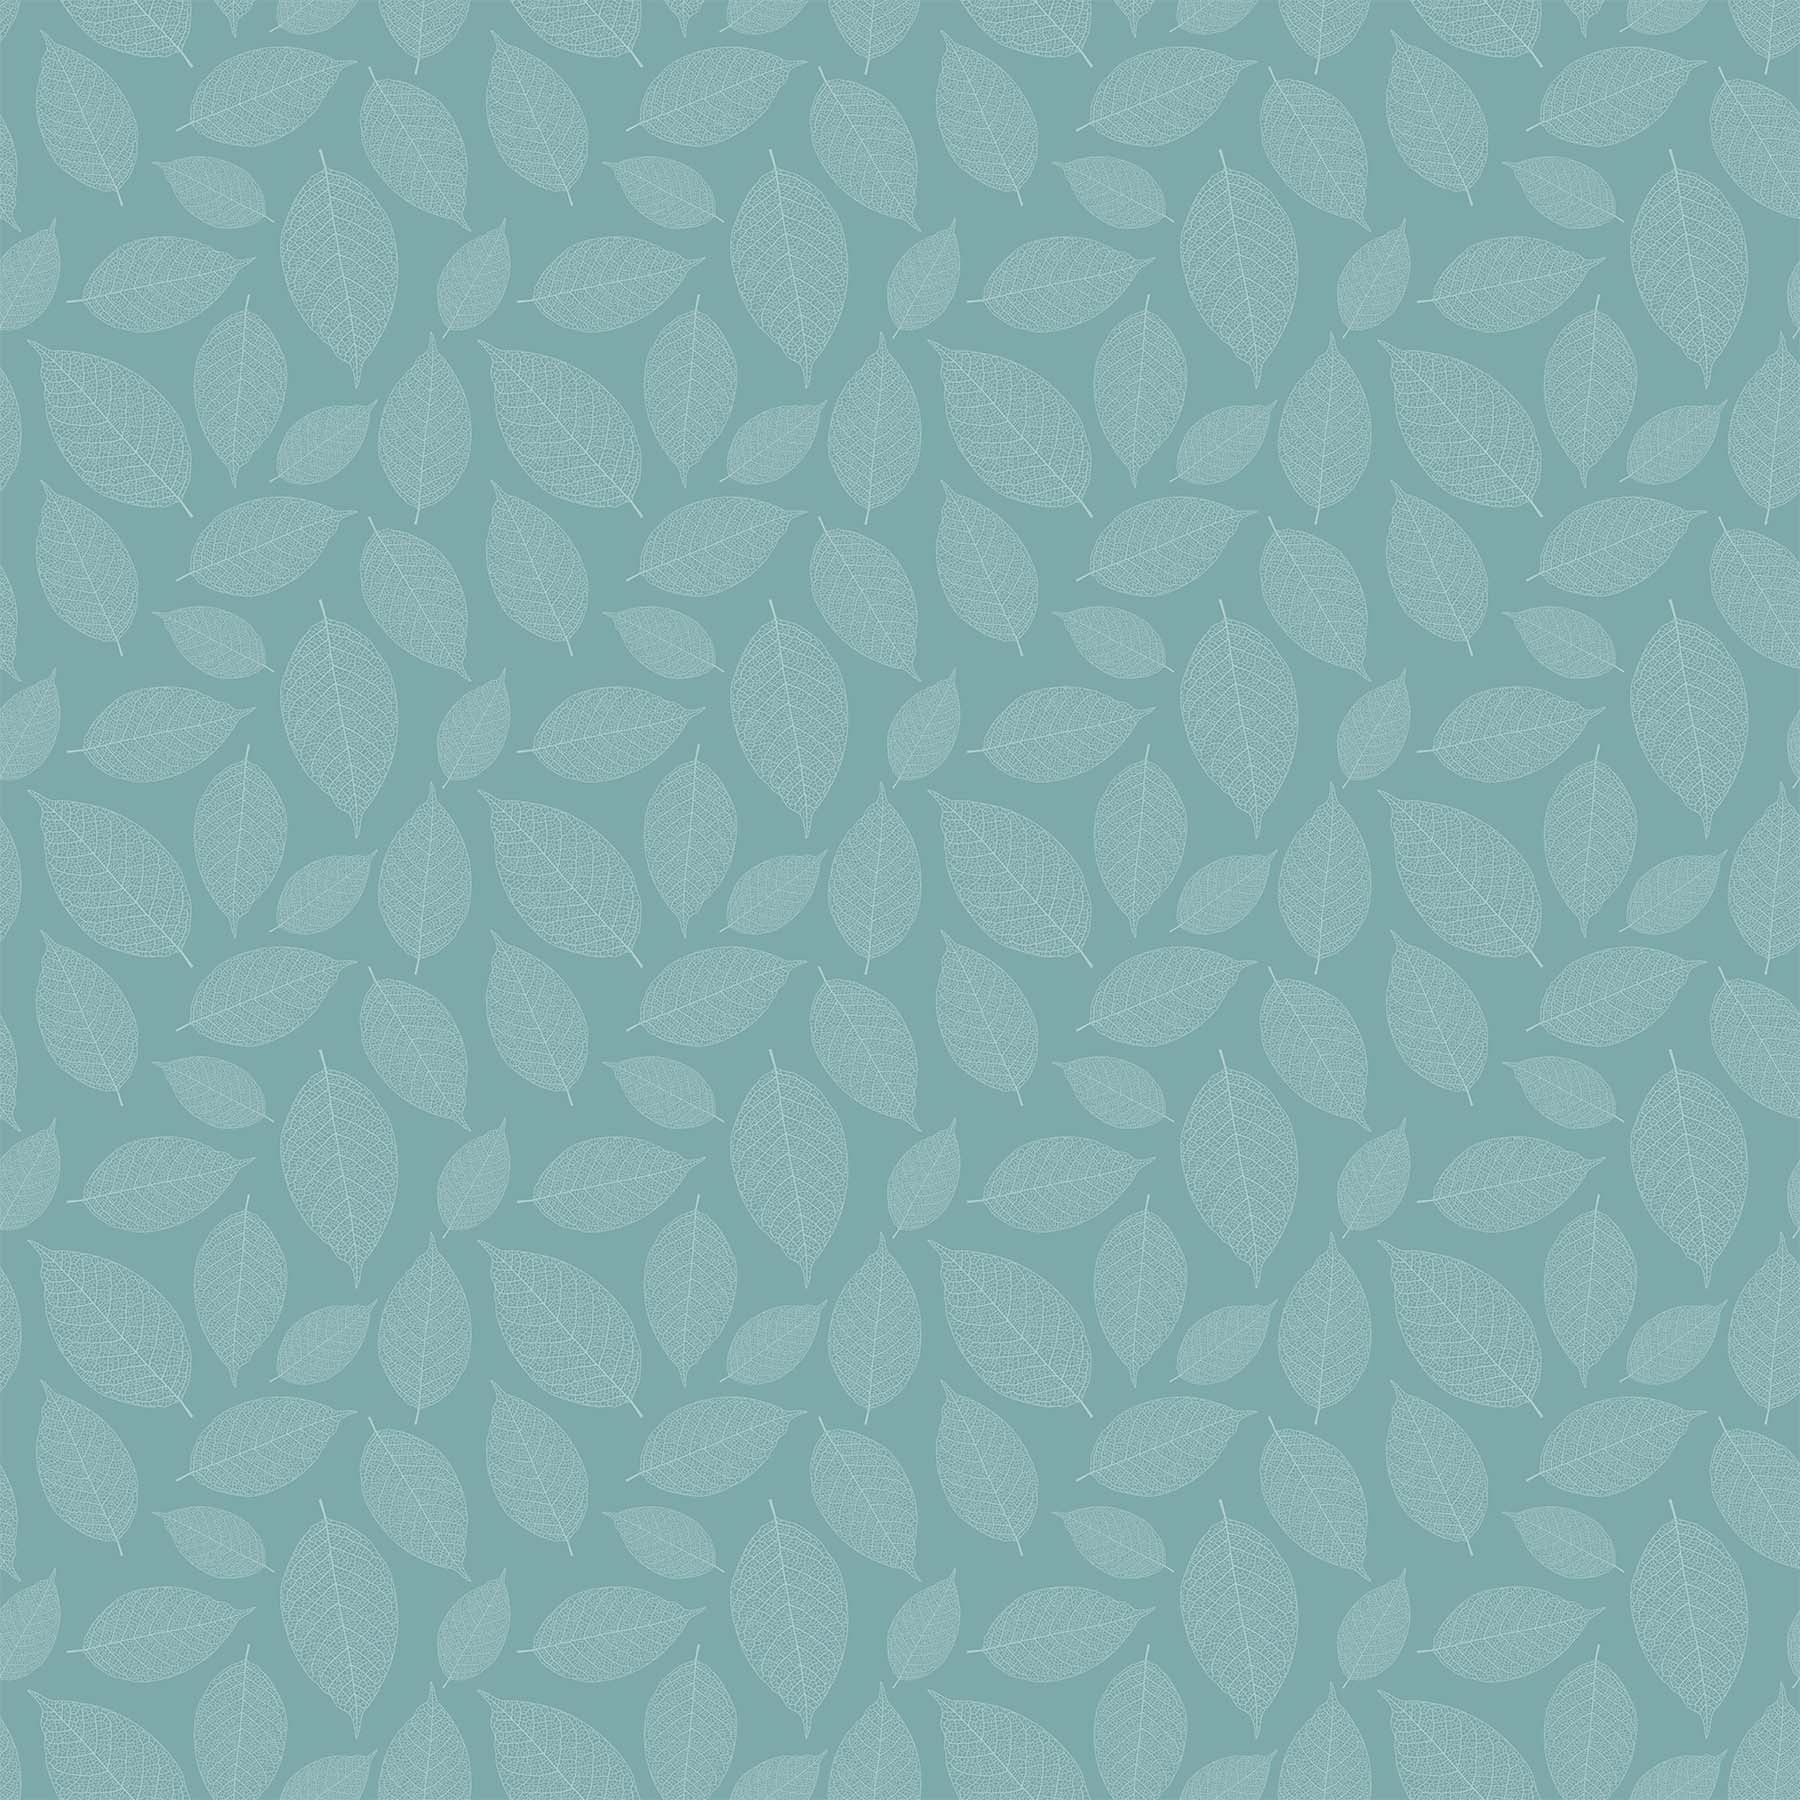 Fabric, Silhouette, Nordic Sky Small Leaves 23989-62